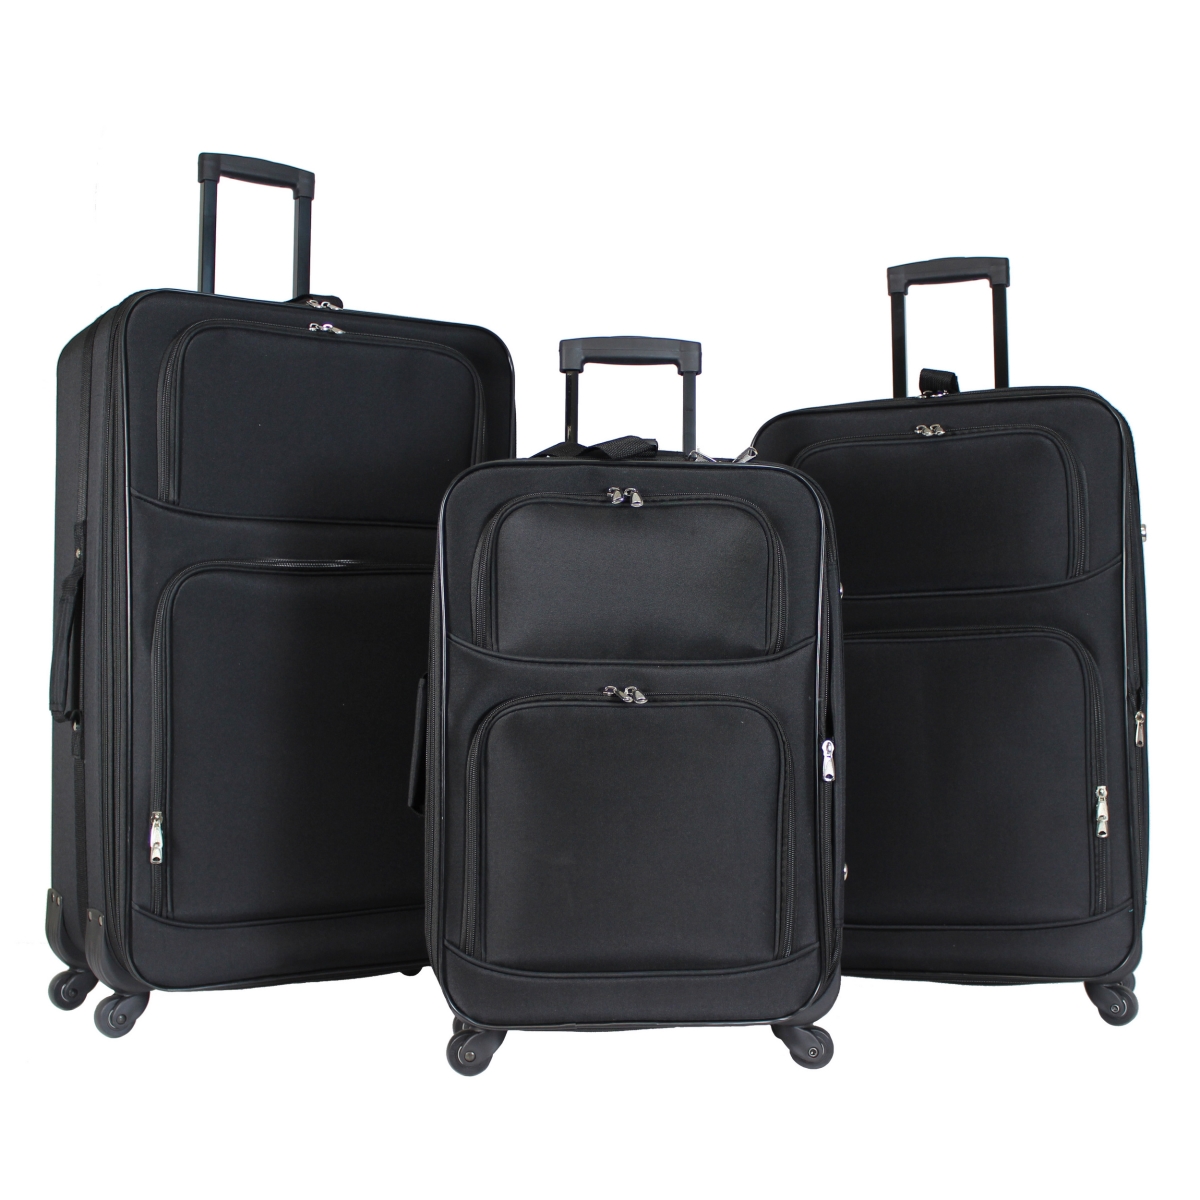 818703-b Rolling Expandable Spinner Luggage Set - Black, 3 Piece